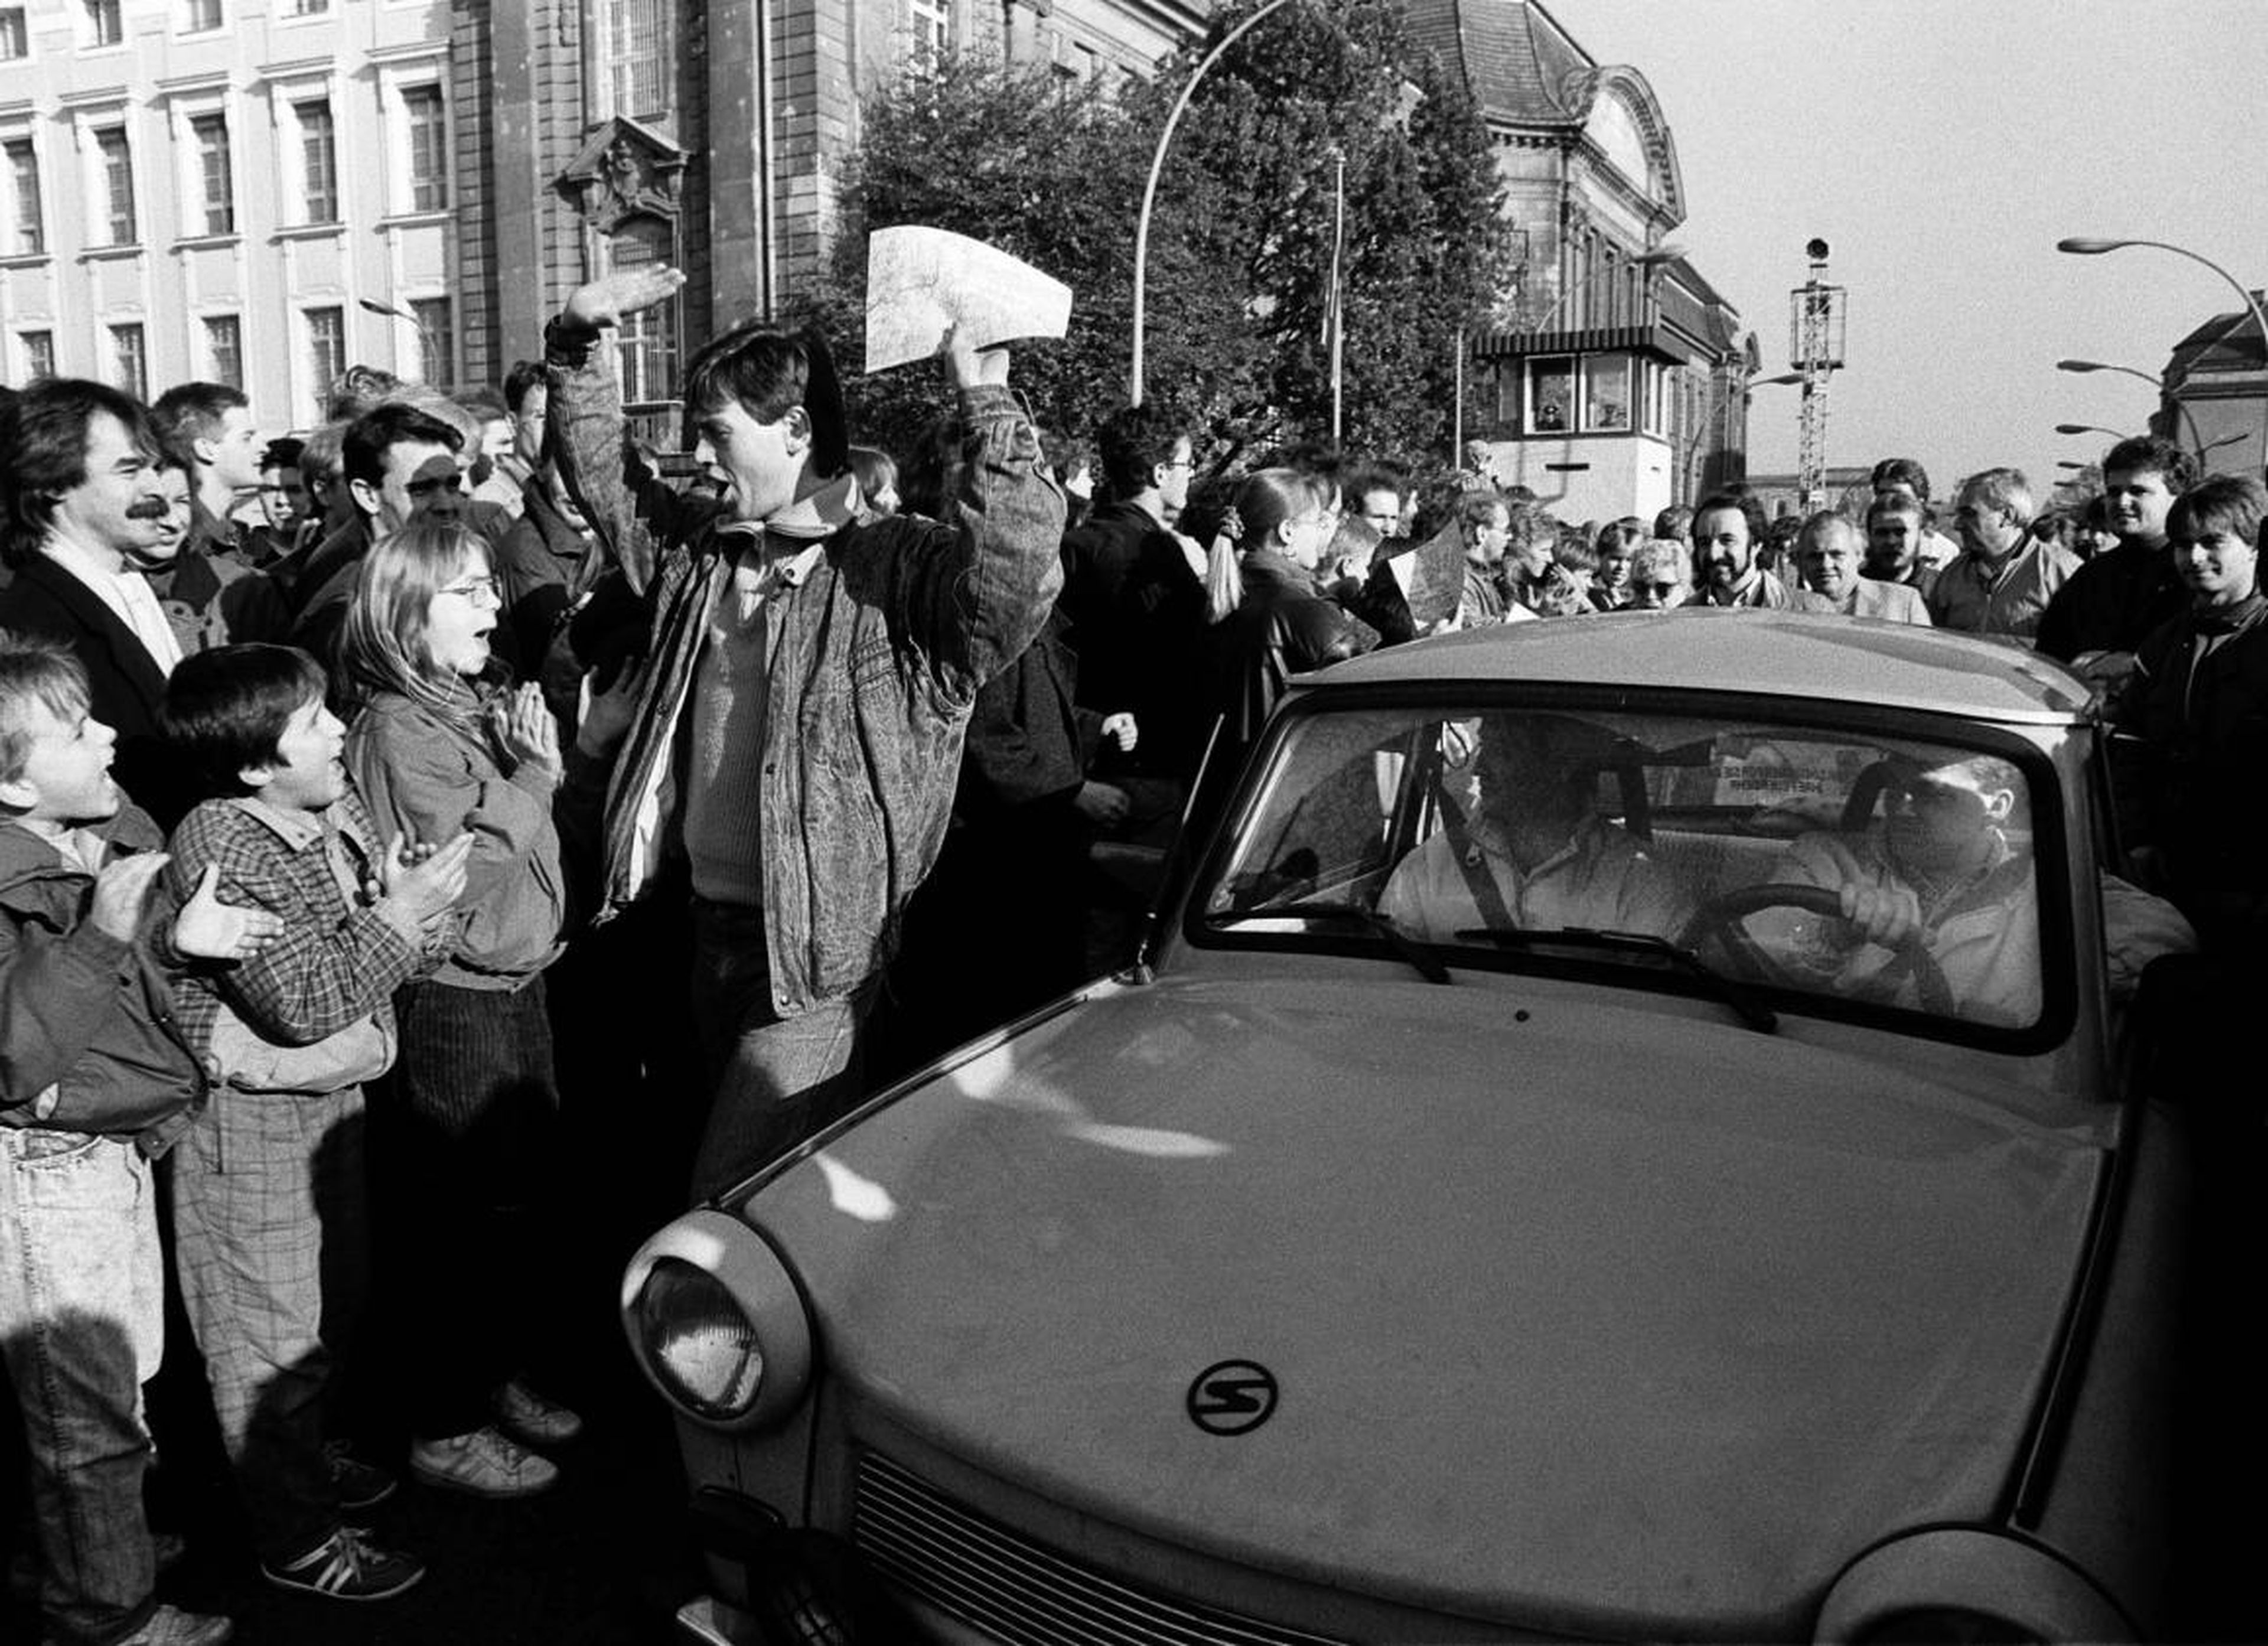 There was plenty of celebration as West Berlin citizens welcomed East Germans as they passed the border checkpoint.